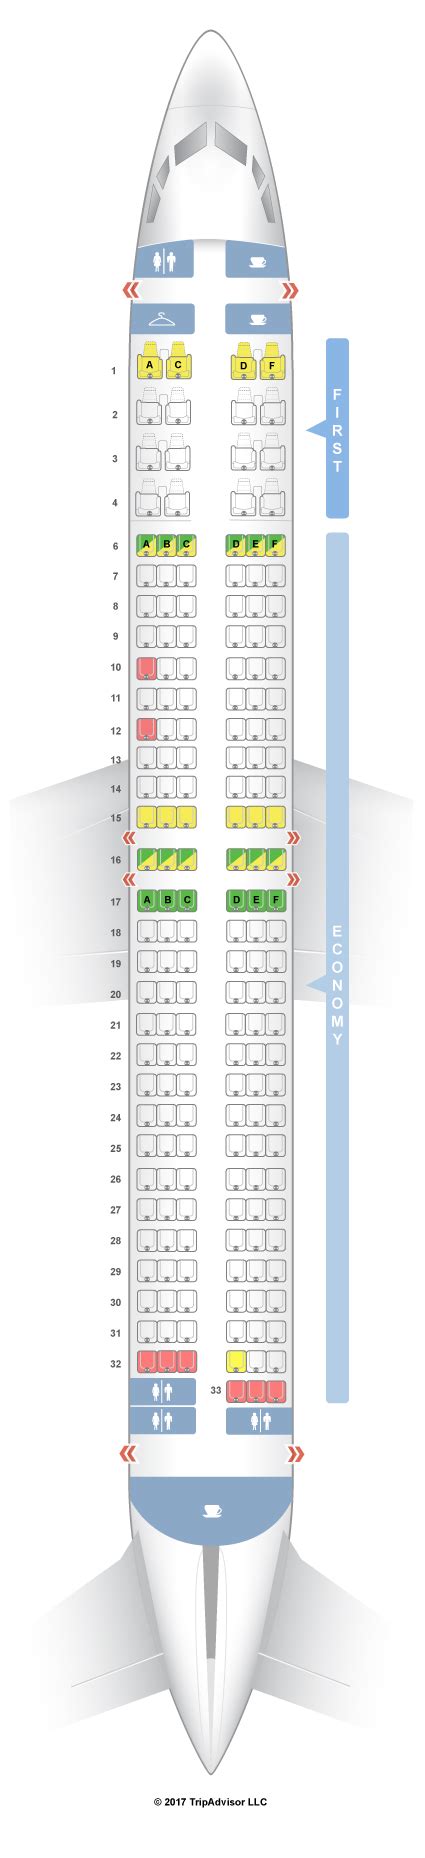 Alaska Airlines Seat Maps. Overview; Planes & Seat Maps. Airbus A319 (319) Layout 1; Airbus A319 (319) Layout 2; Airbus A320 Layout 1; Airbus A320 Layout 2; Airbus A320 Layout 3; Airbus A321 (321) Boeing 737-700 (737) Boeing 737-800 (738) Boeing 737-900 (739) Bombardier Q400; Embraer 175 (E75) Check-in; Baggage; Infants; Minors; Pets …. 